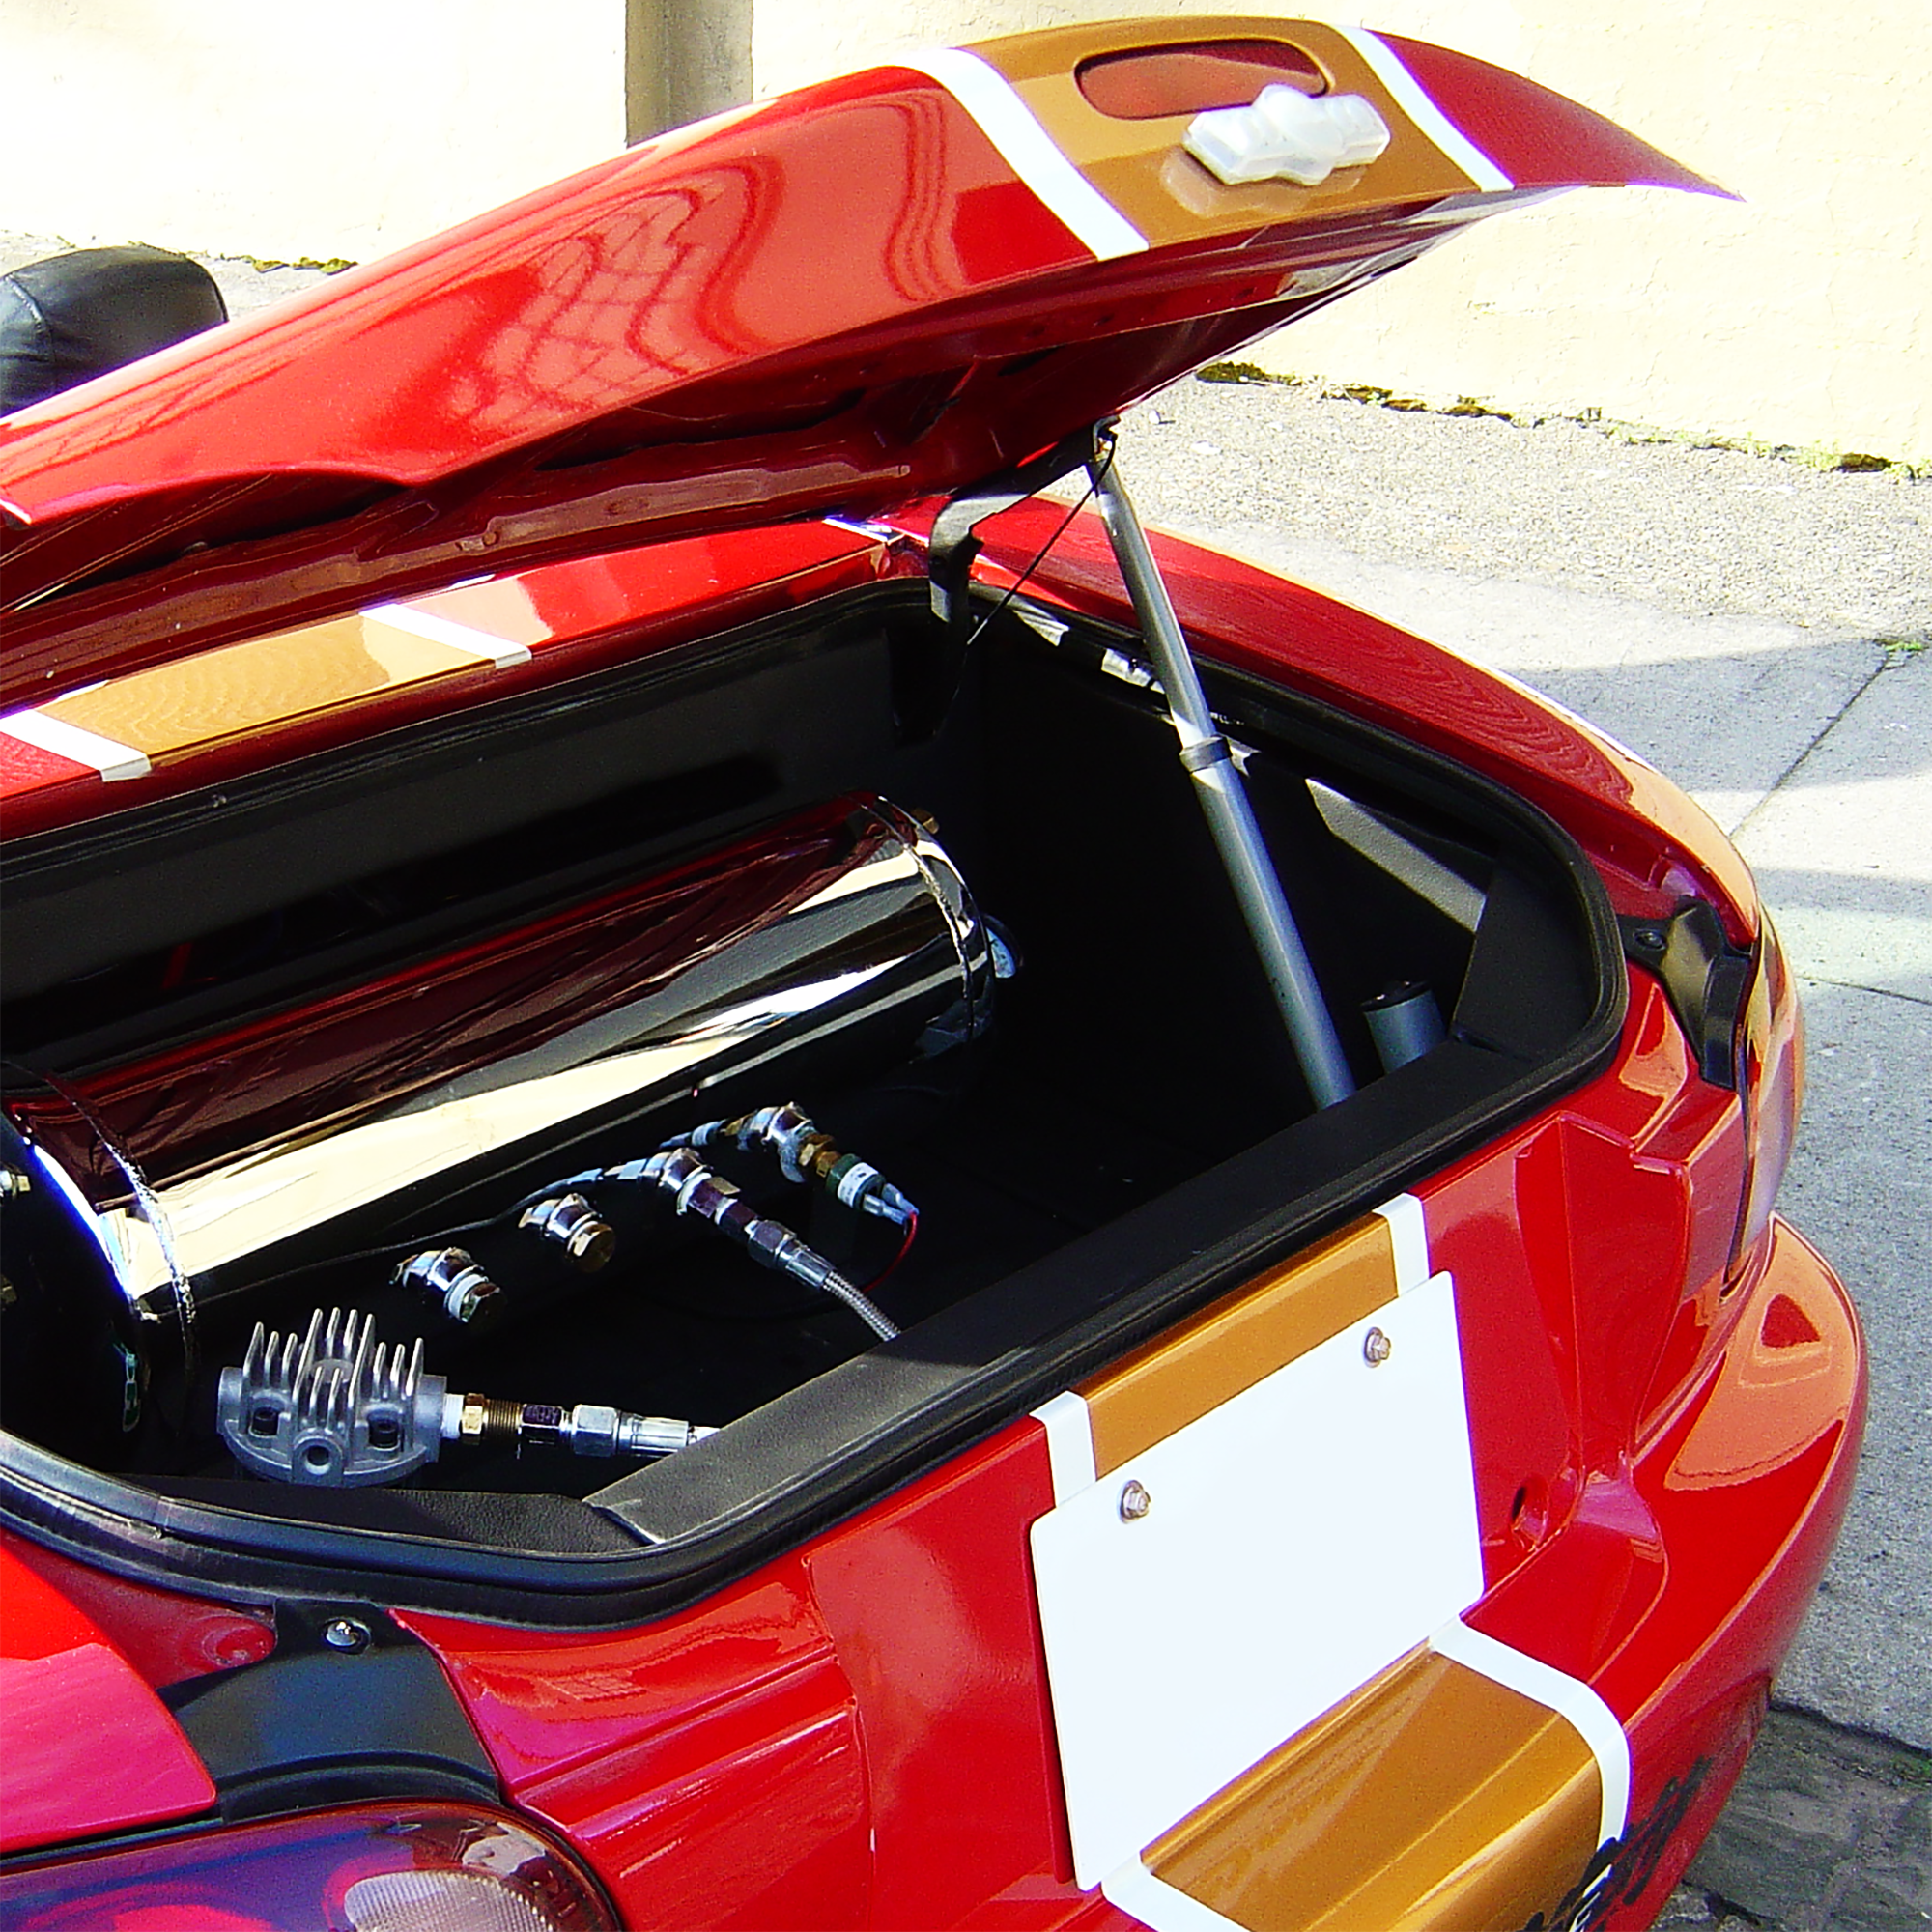 Linear Actuator Installed in Trunk